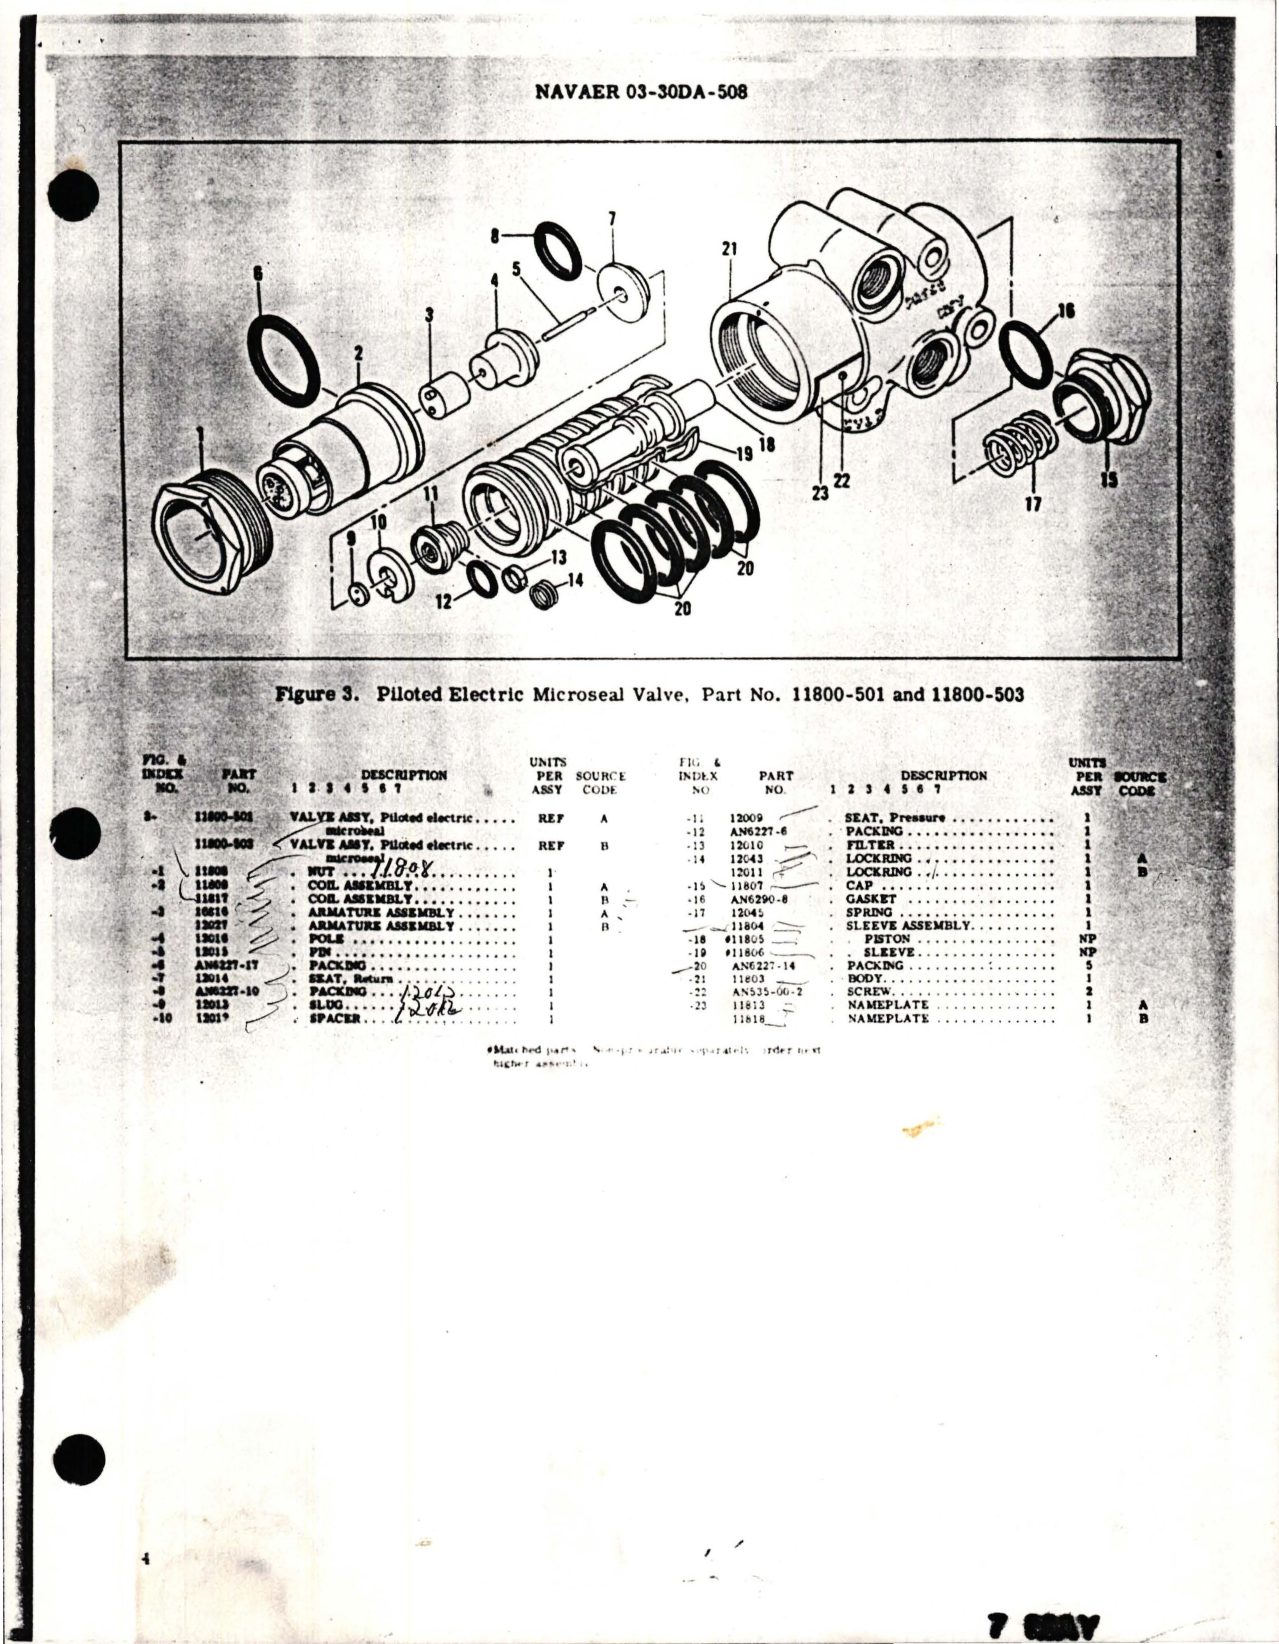 Sample page 5 from AirCorps Library document: Overhaul Instructions with Parts Breakdown for Piloted Electric Microseal Valve - Part 11800-501, 112800-503